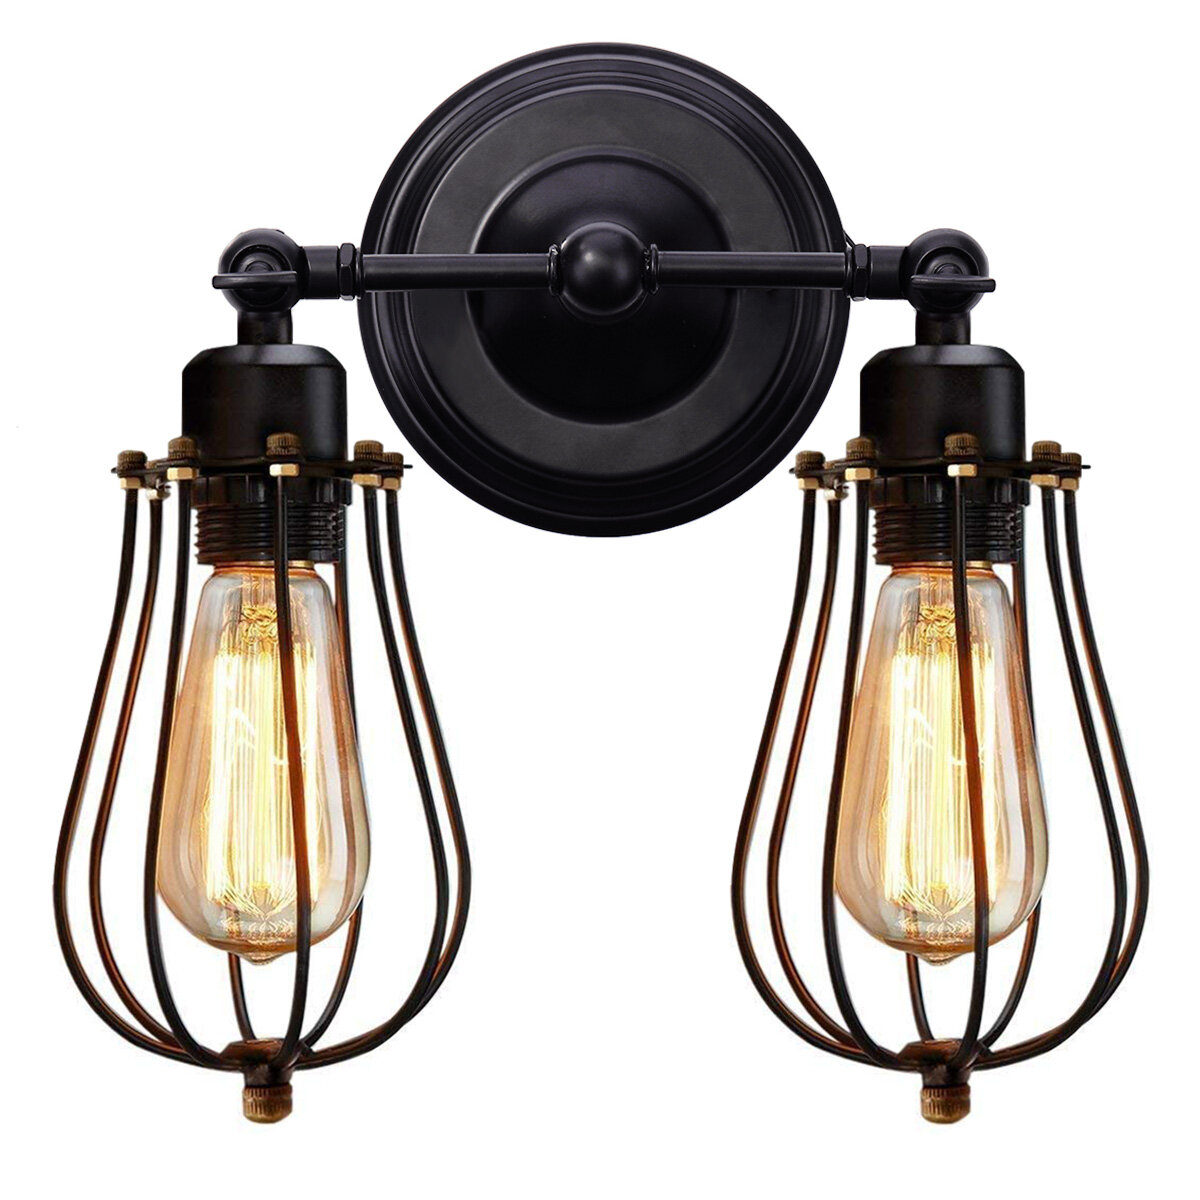 KINGSO 110V Wall Sconce 2 Light Metal Industrial Wire Cage Wall Light Fixture Vintage Style Edison Rustic Wall Lamp for